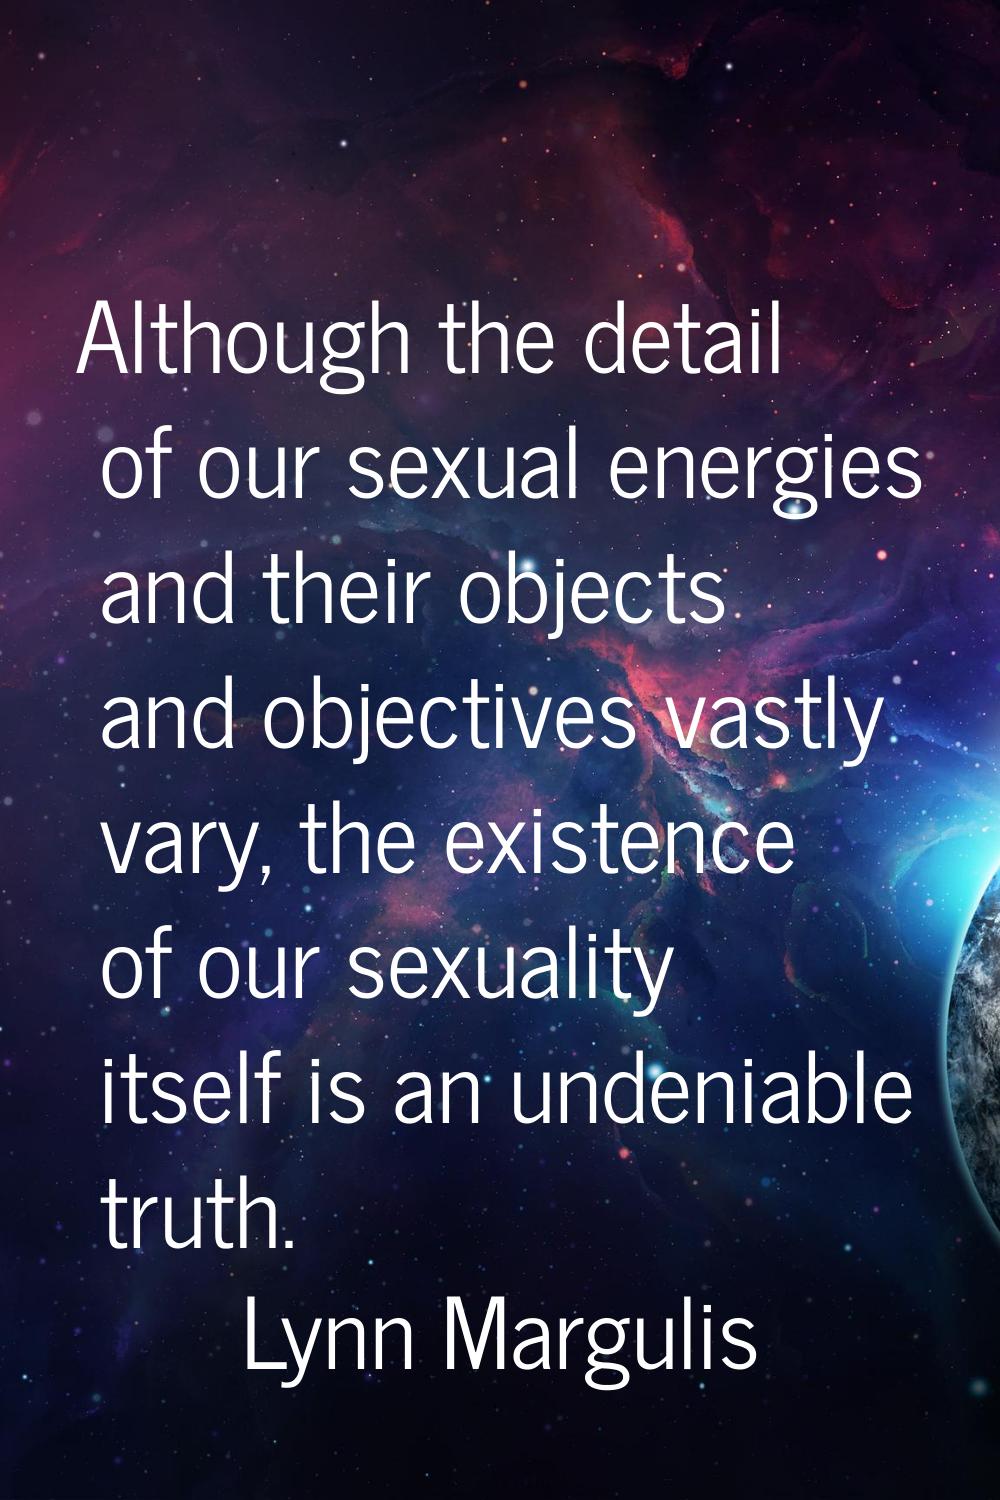 Although the detail of our sexual energies and their objects and objectives vastly vary, the existe